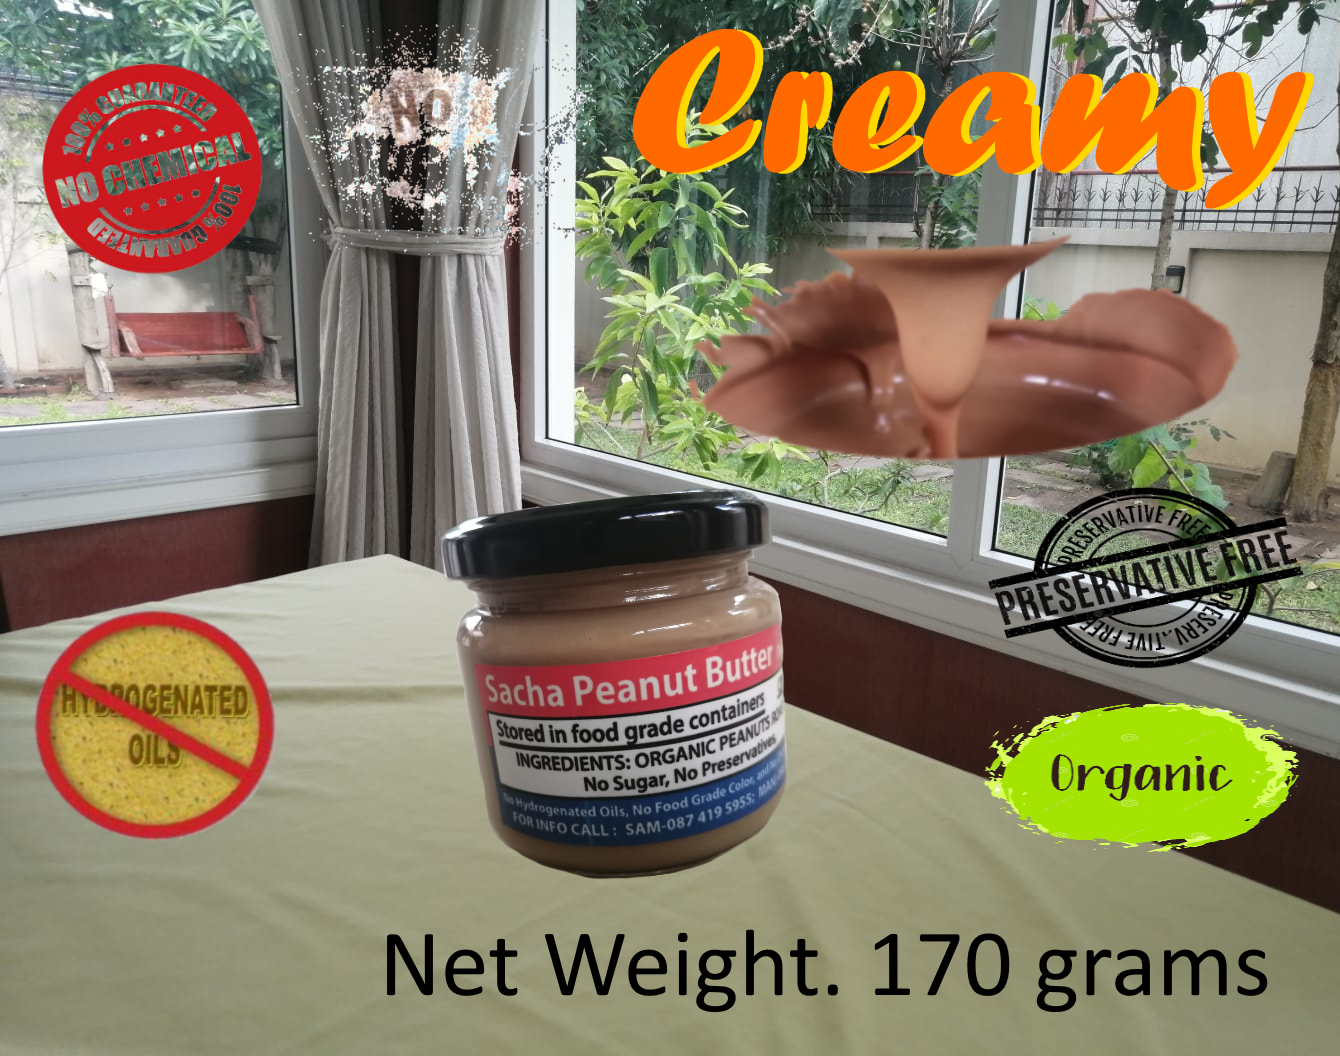 Sacha Peanut Butter (Creamy) All Natural Organic (170 grams) - Free Delivery, ซาช่า-เนยถั่ว (ส่งฟรี)